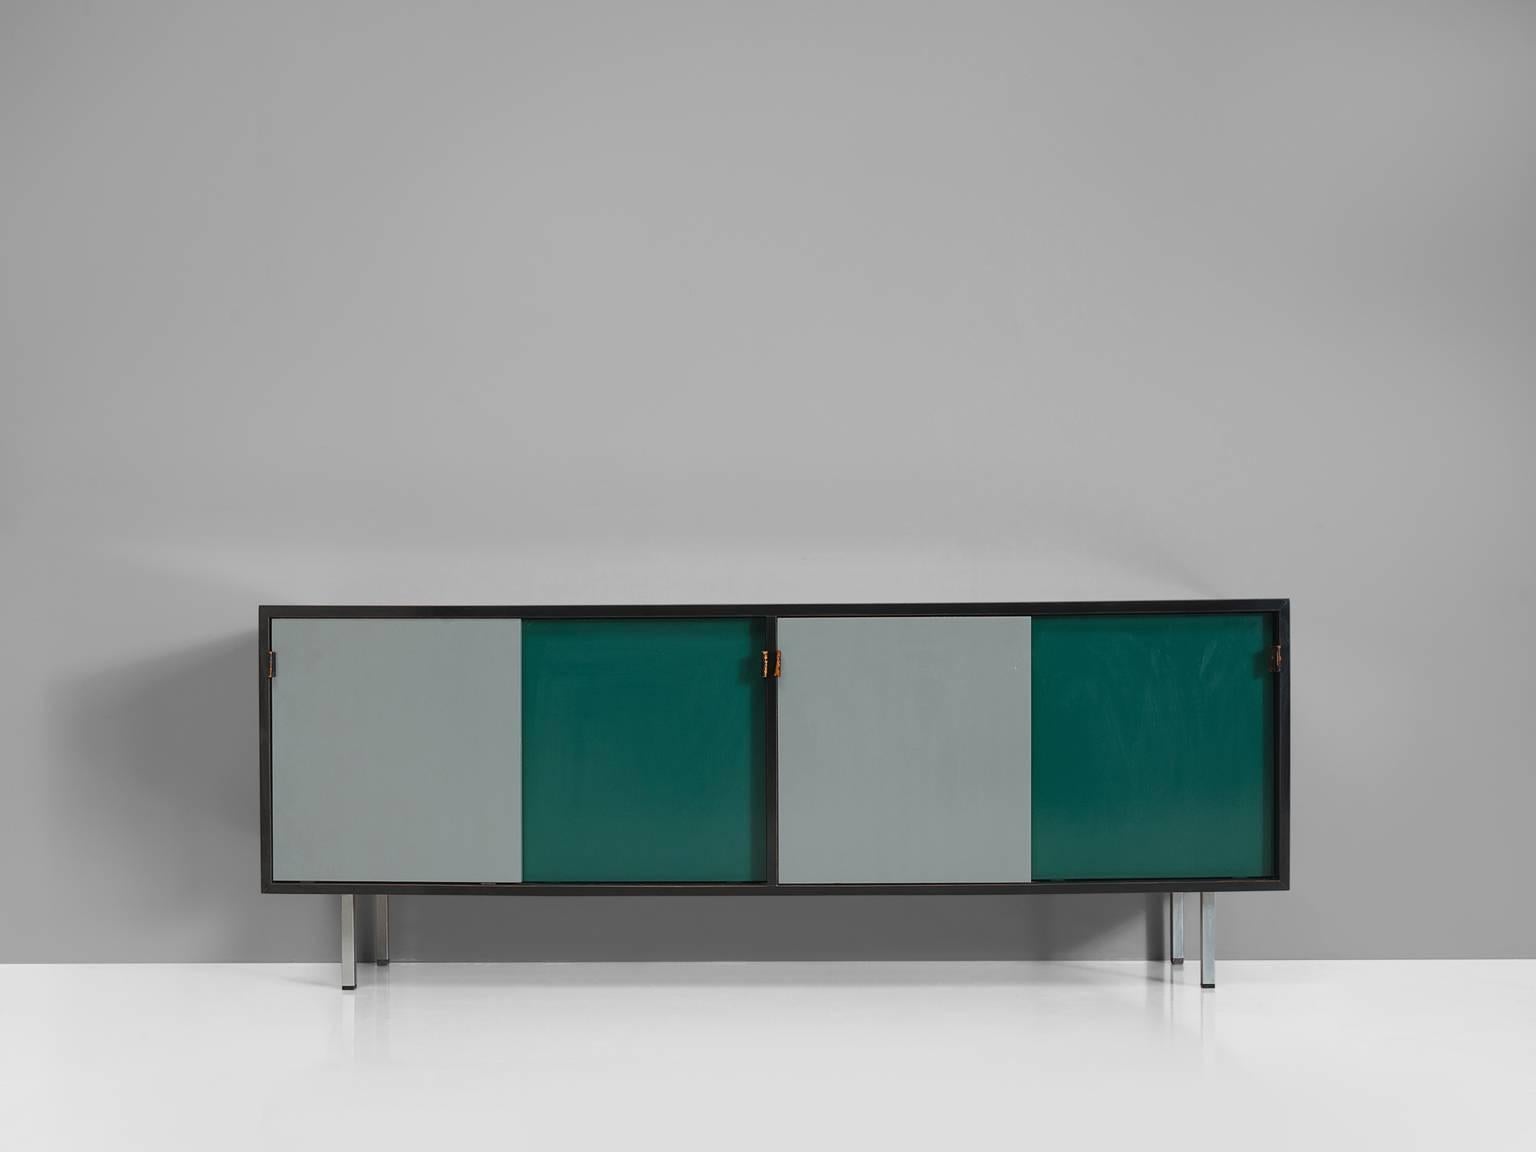 Sideboard, grey and green wood, metal feet, leather straps, France, 1960s.

This sideboard is designed and made by making use of colour blocks. The sideboard is executed in green and grey sliding doors that are framed by a black border. This